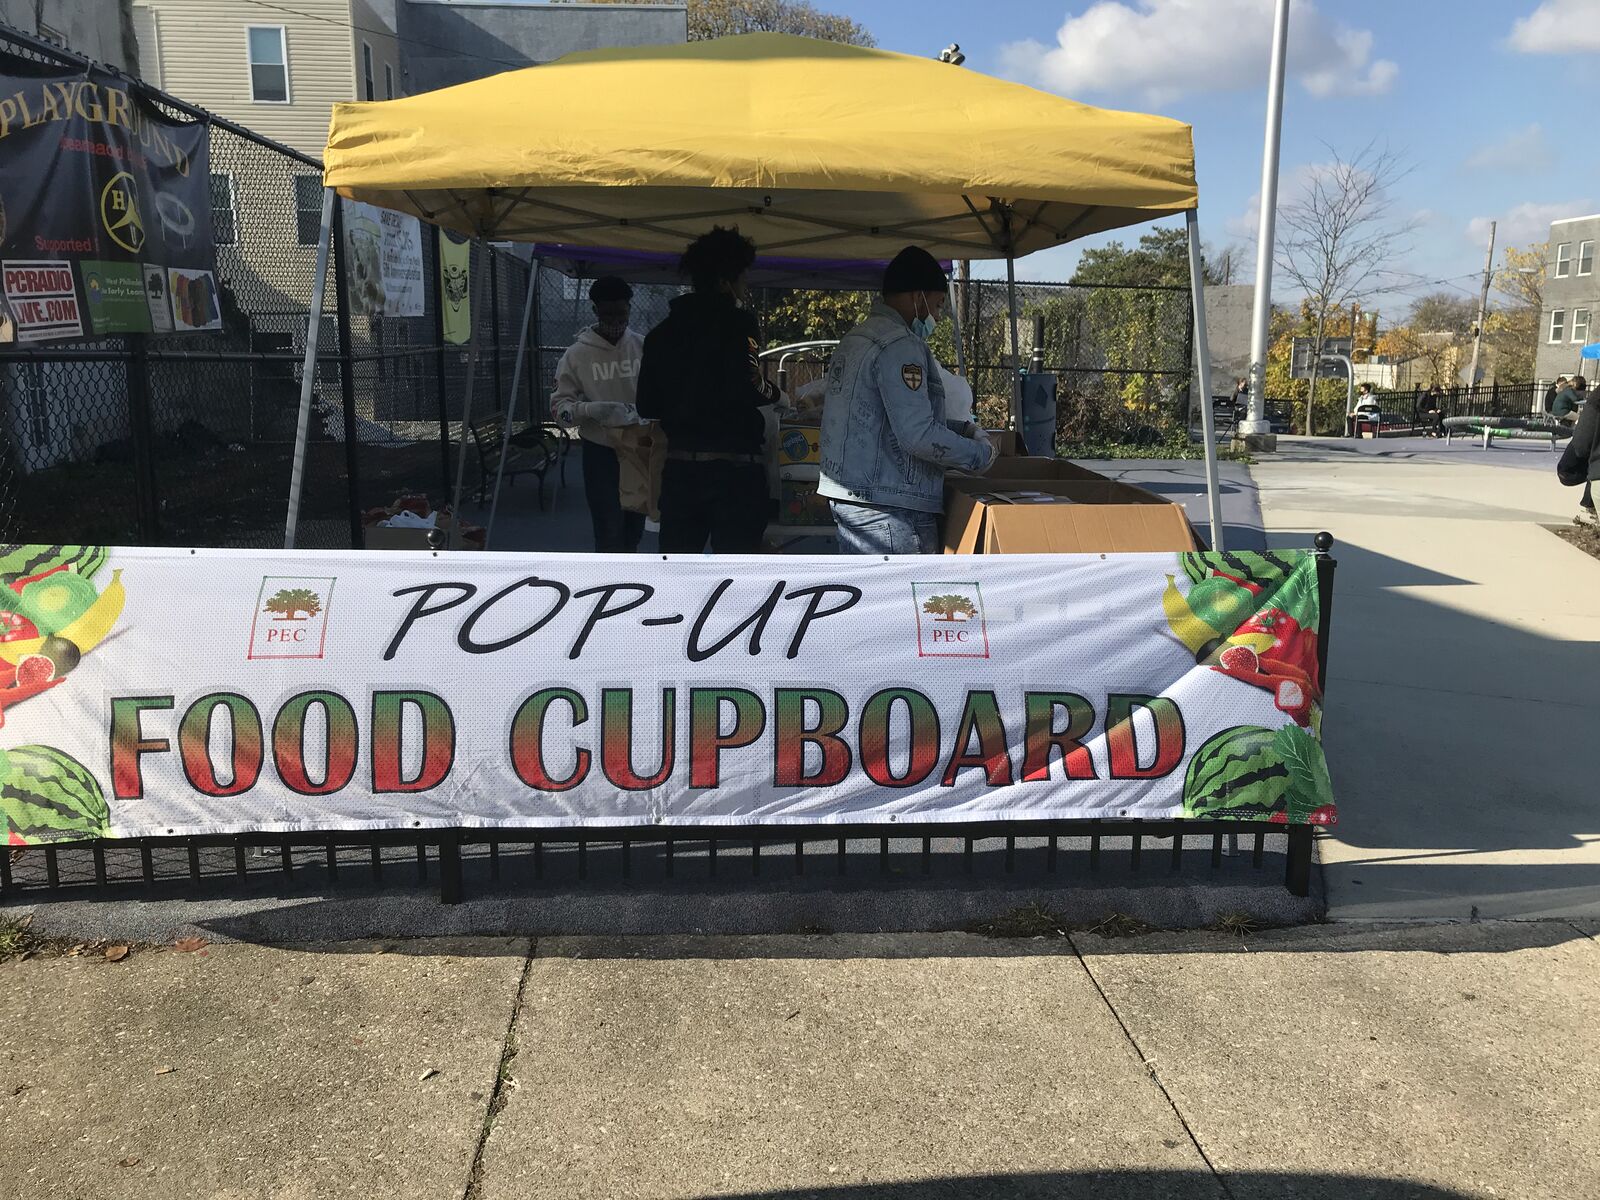 a pop up food cupboard outdoors